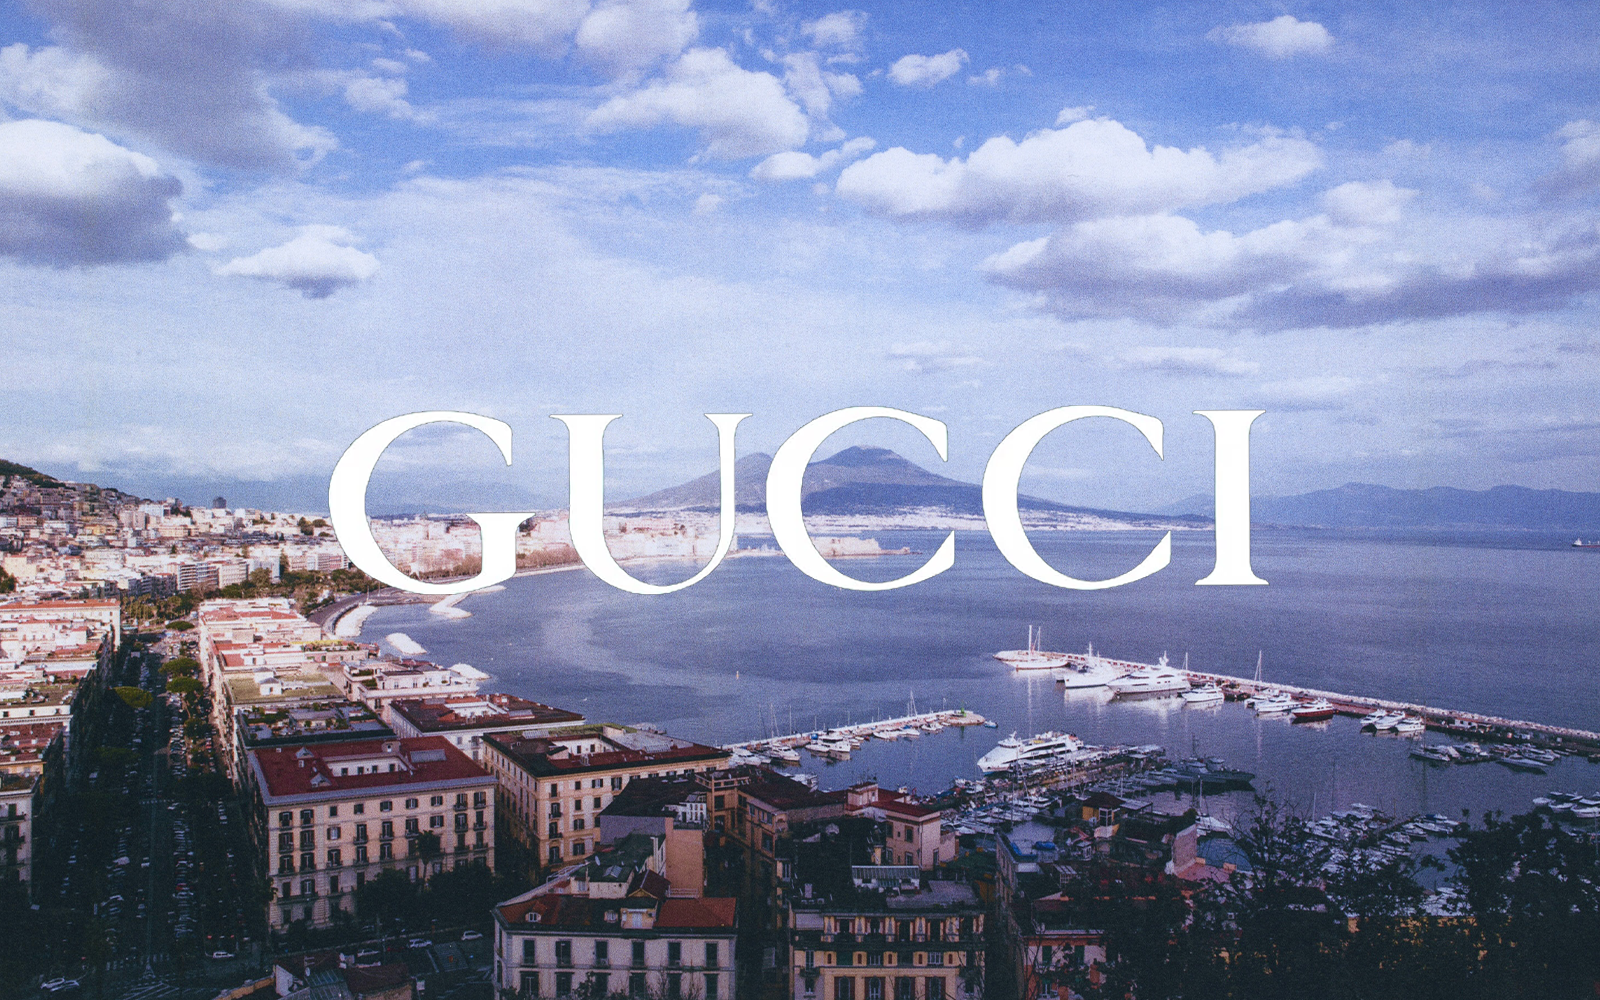 Gucci returns to Naples with a new store